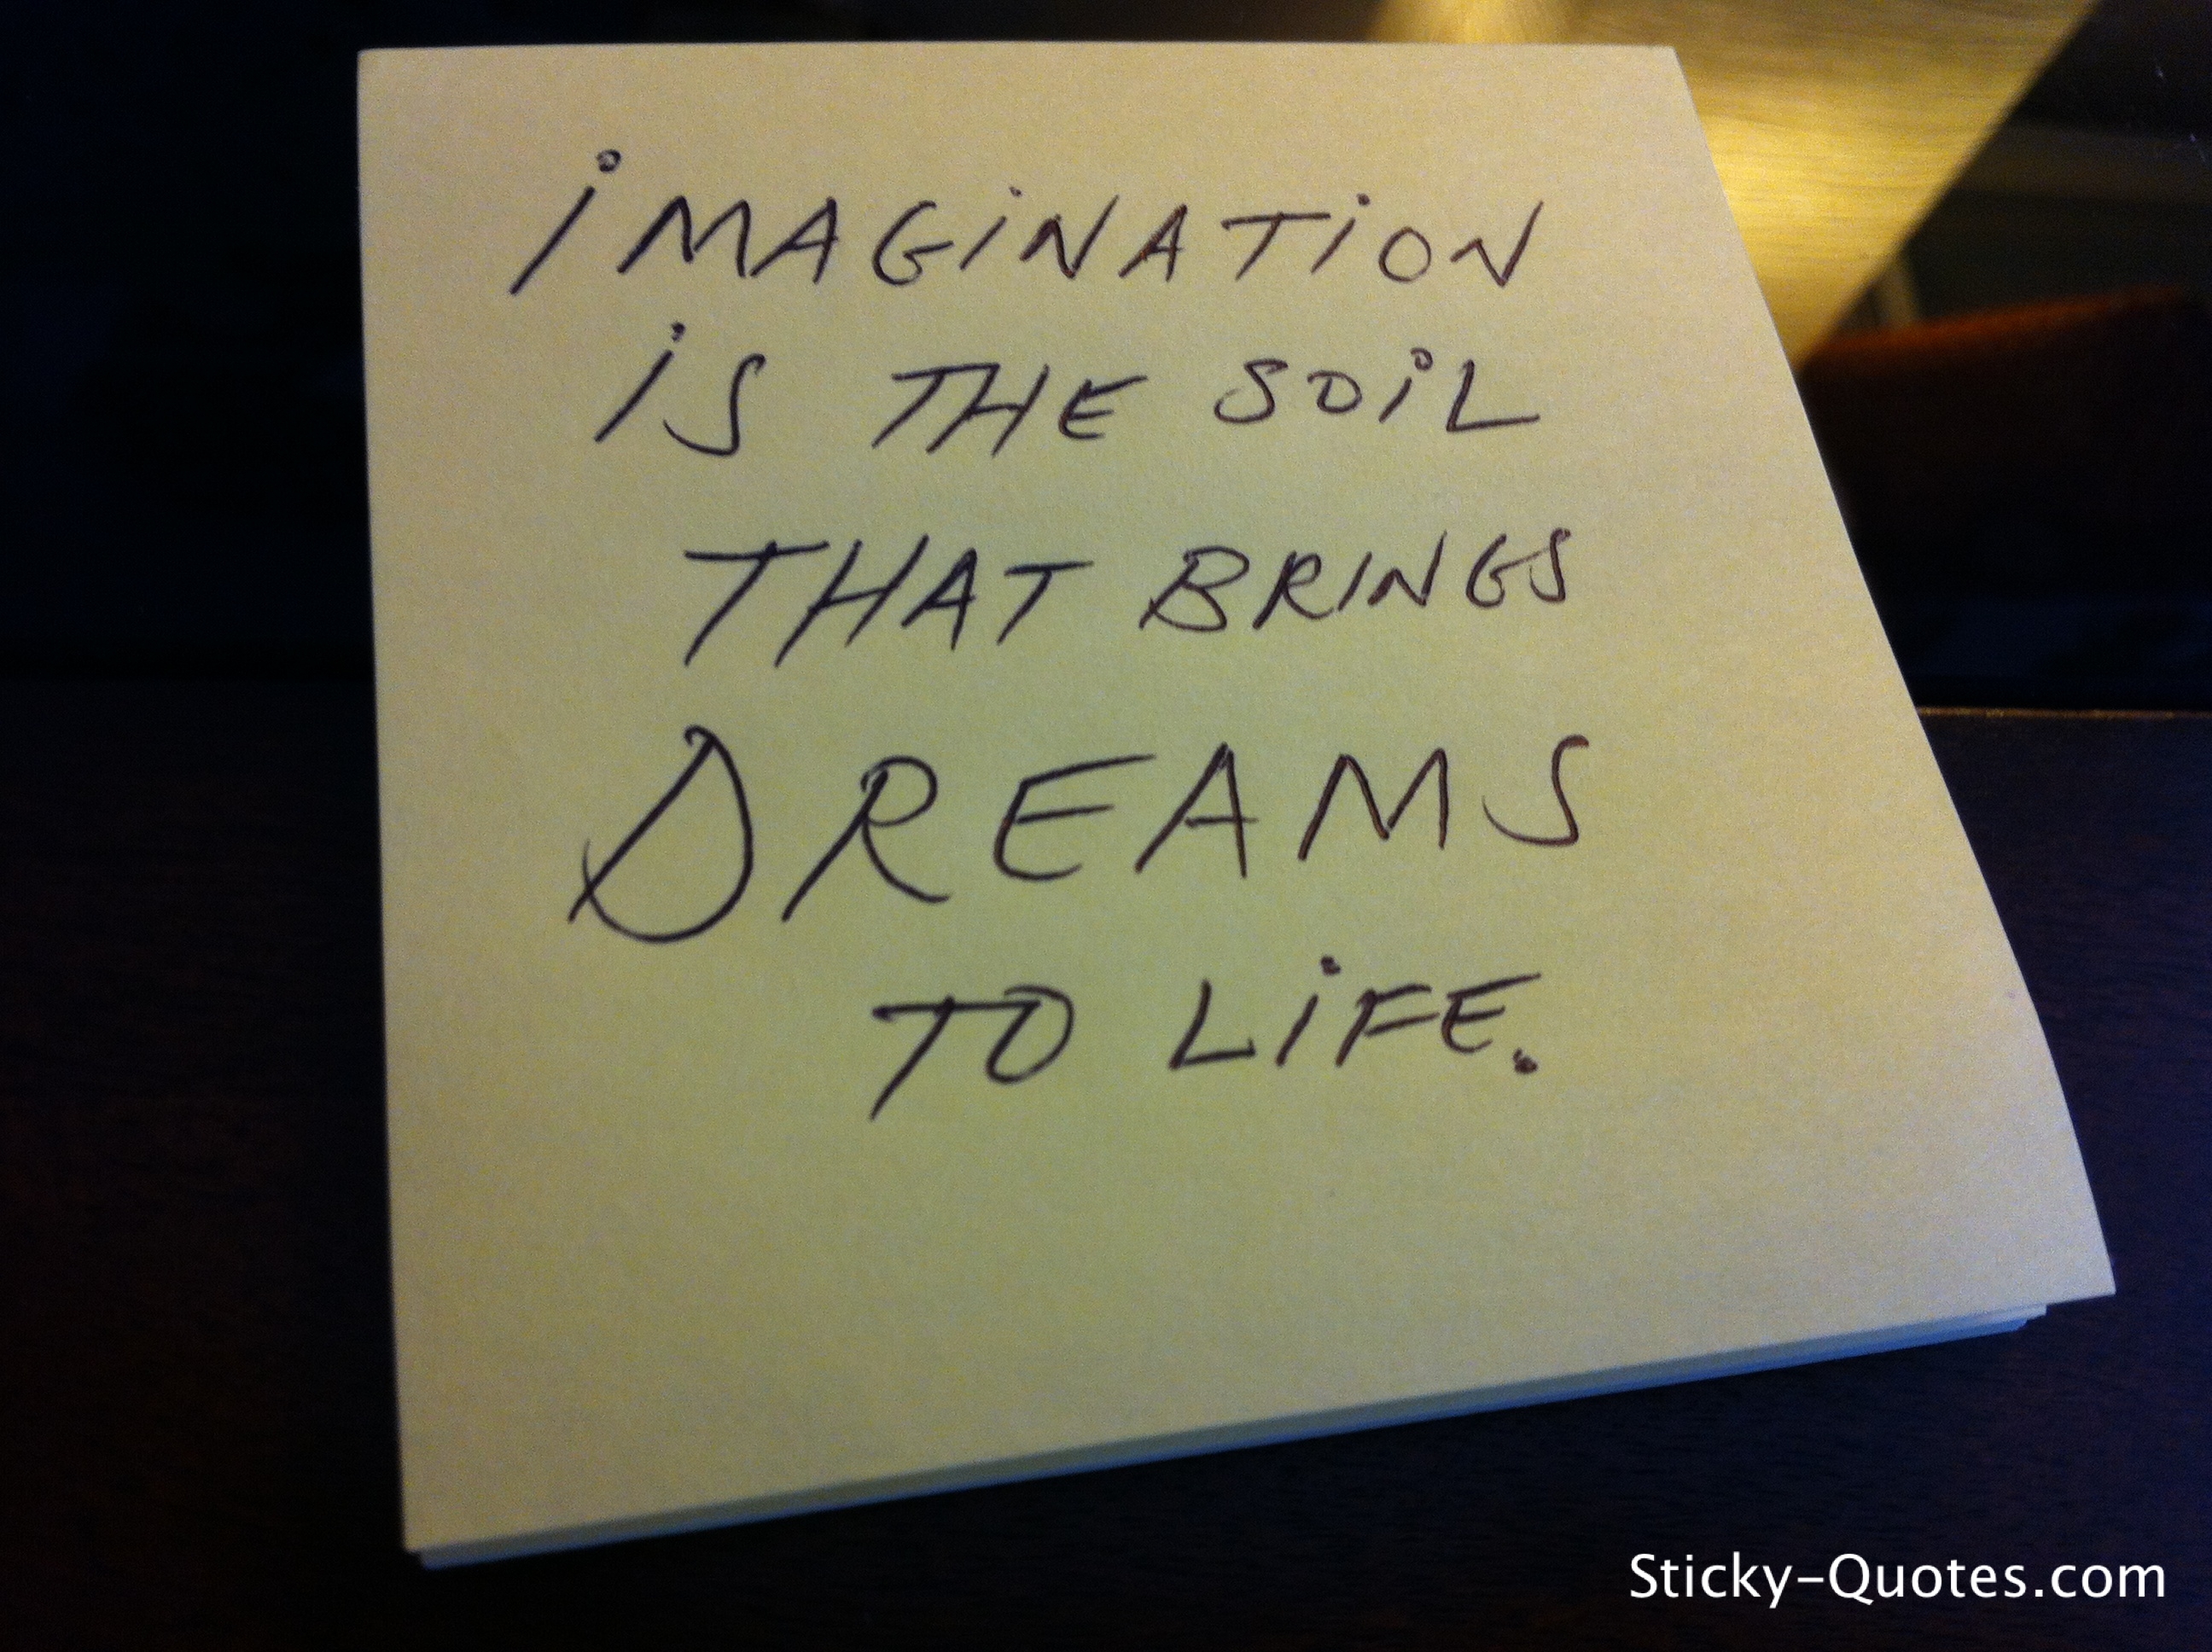 Imagination Is the soil that brings dreams to life